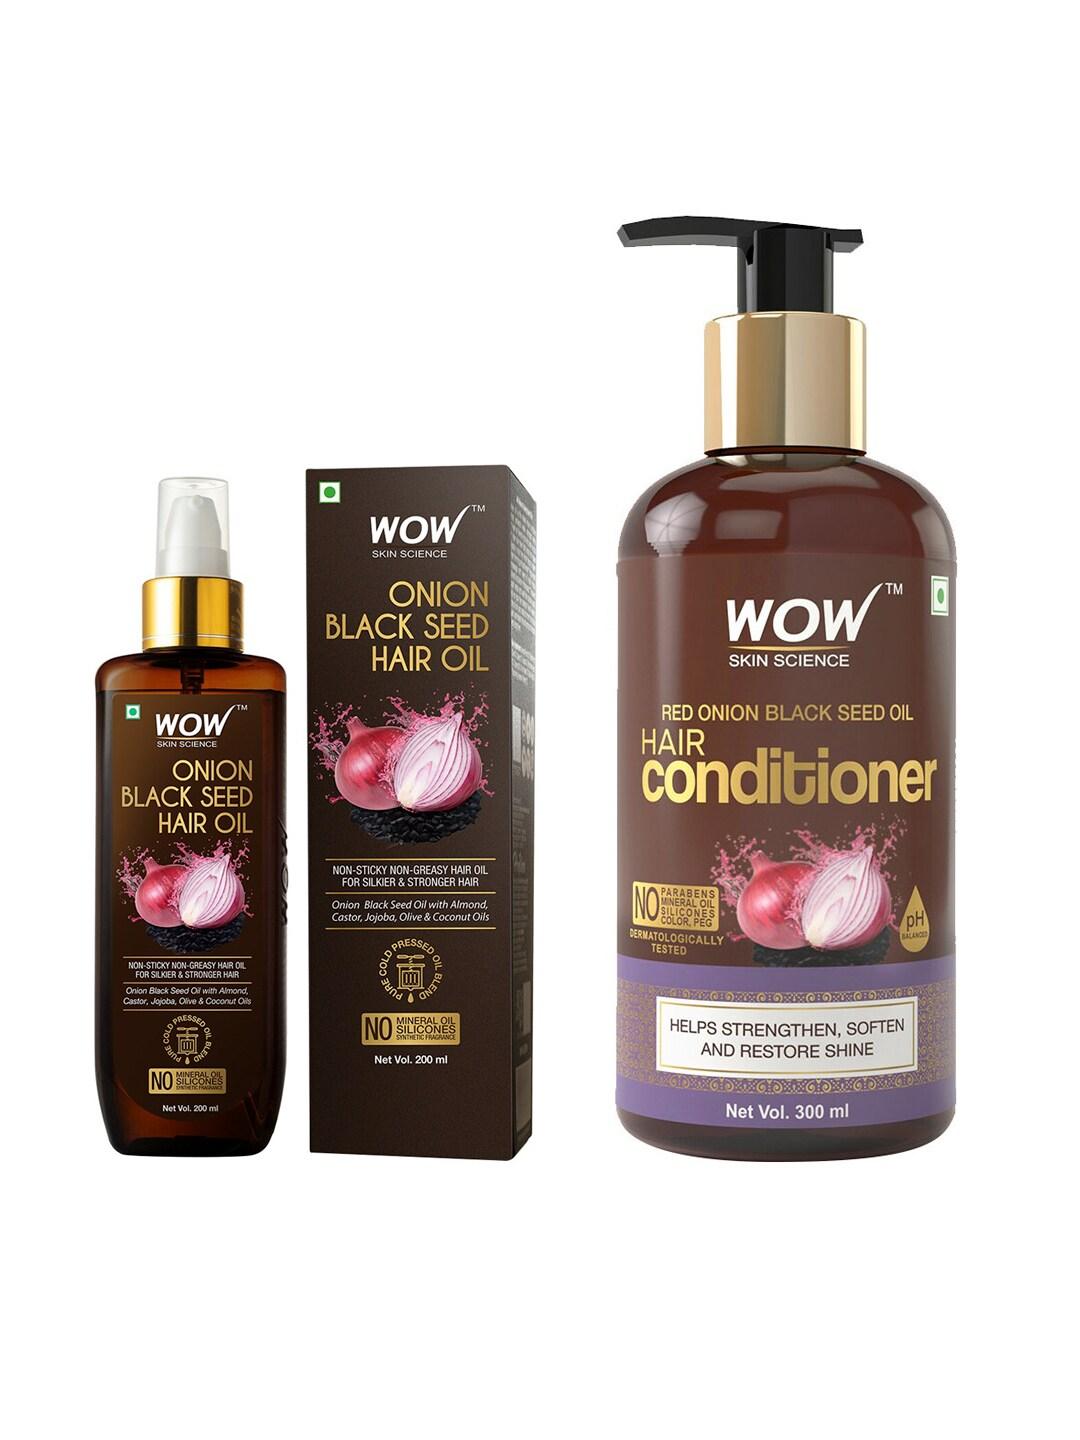 WOW SKIN SCIENCE Set of Onion Black Seed Oil Hair Conditioner & Hair Oil